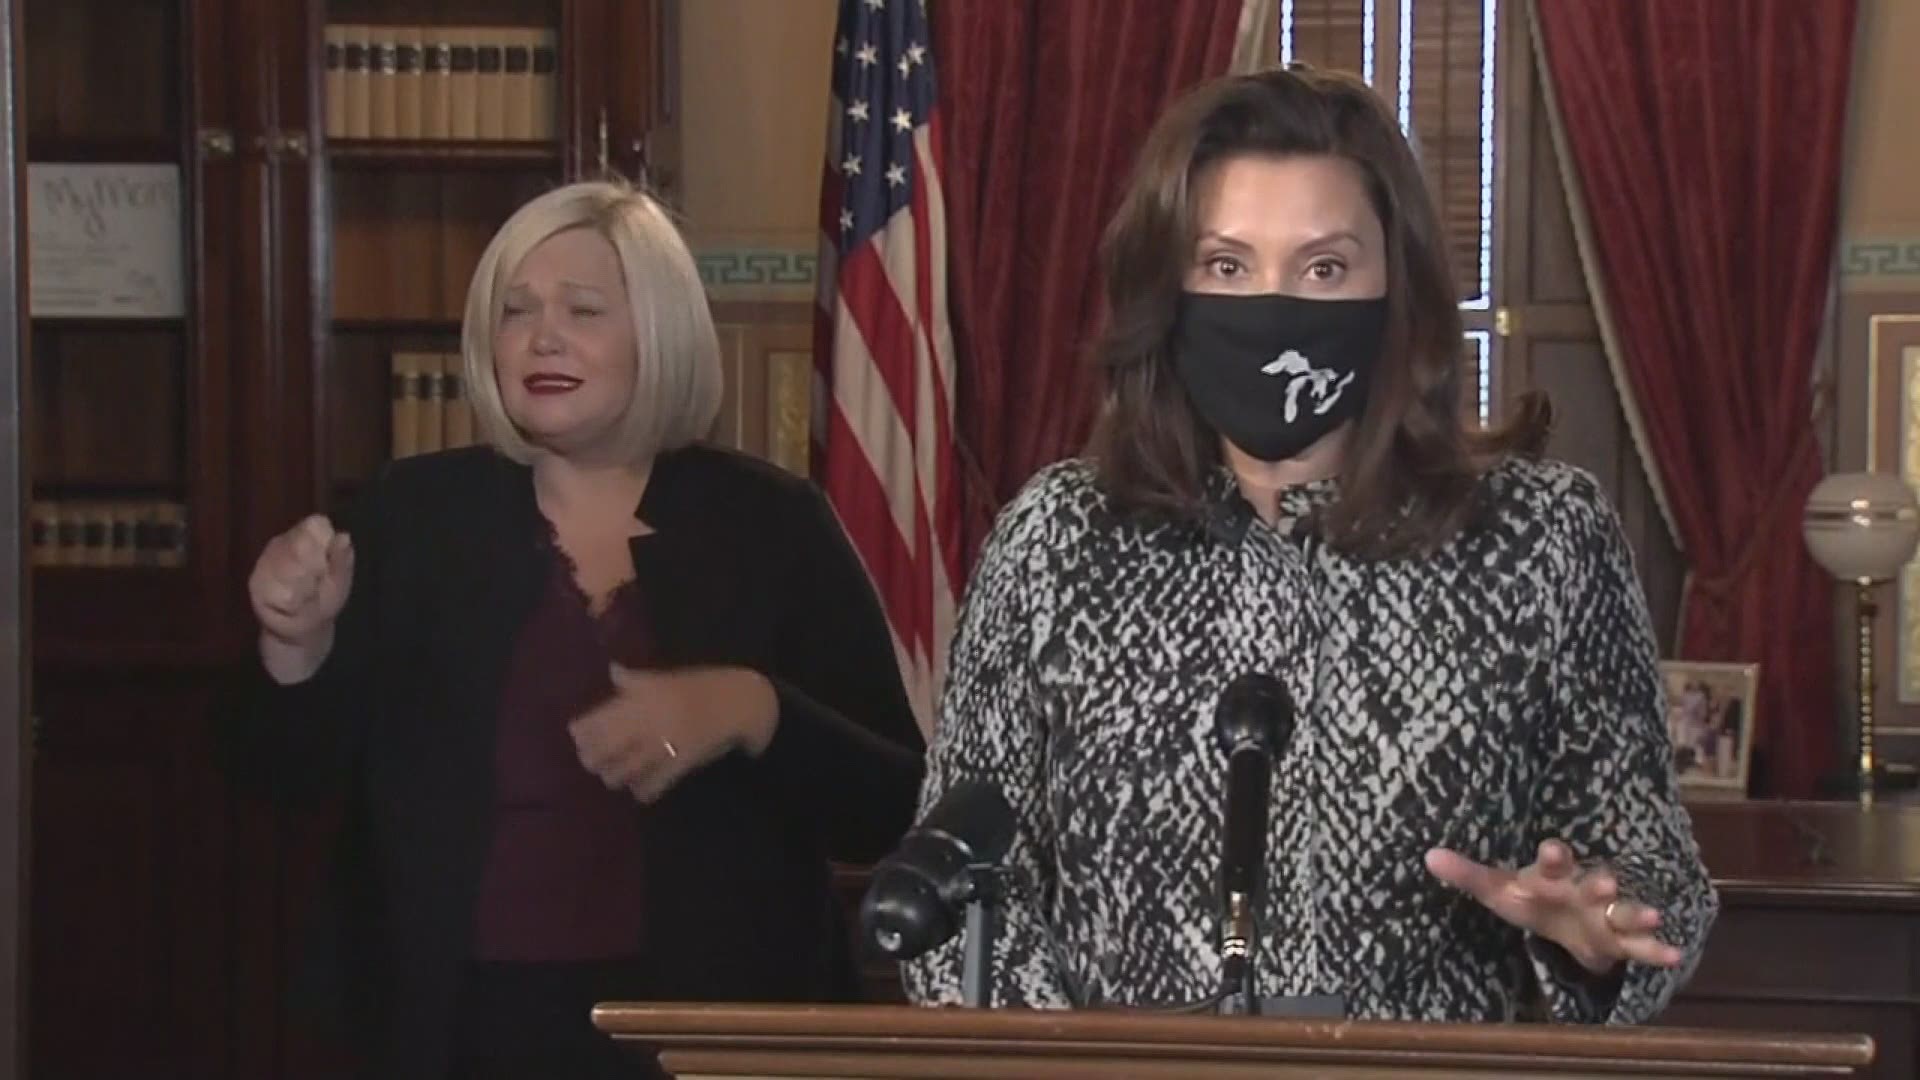 Gov. Gretchen Whitmer announced that her administration will implement another liquor buyback program and work with restaurants to allow SNAP benefits for meals.